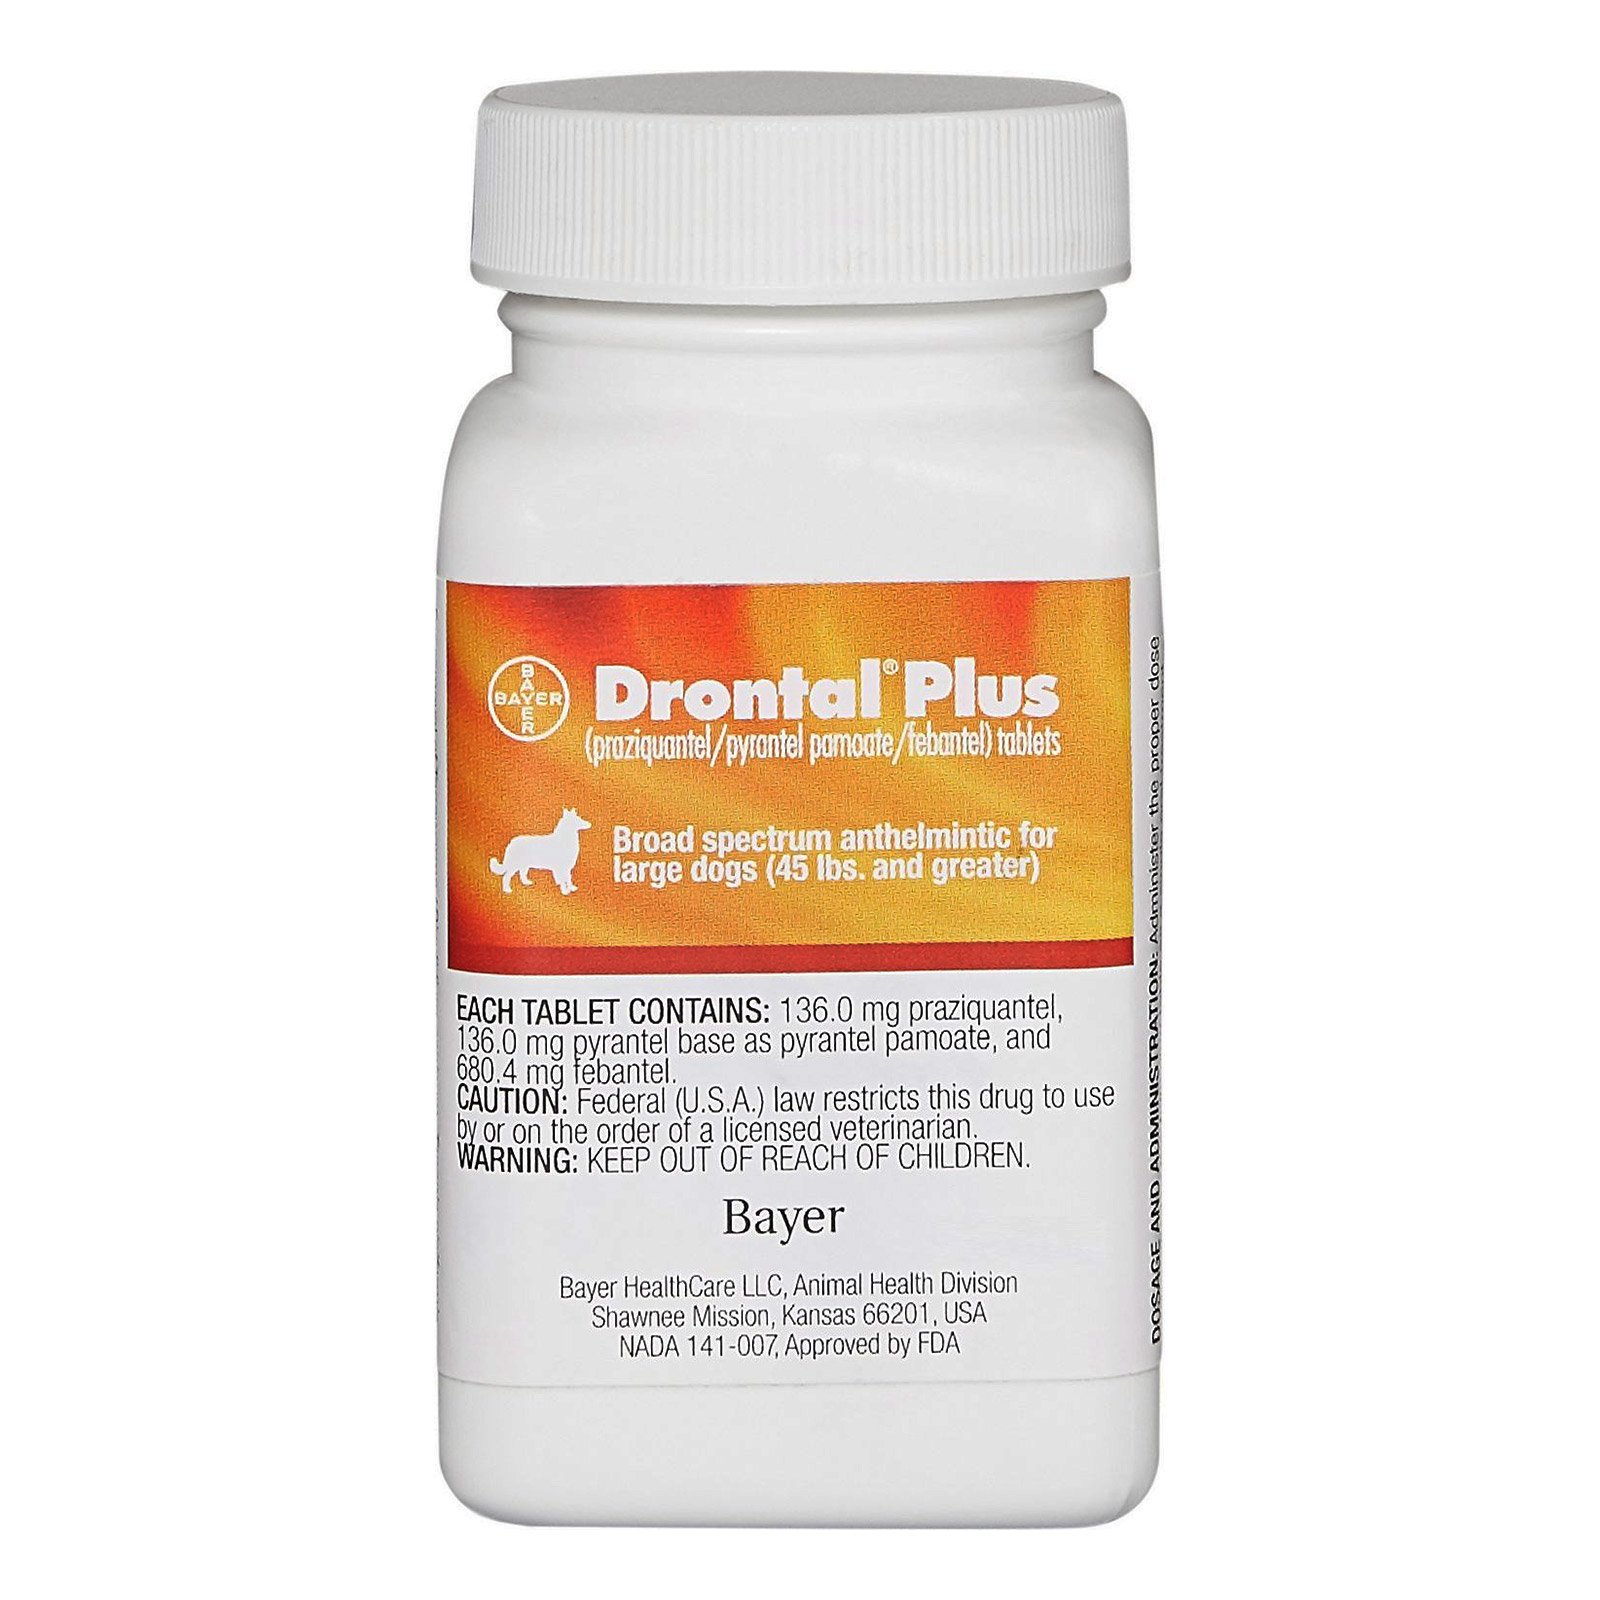 Drontal Plus for Very Small Dogs upto 3kg